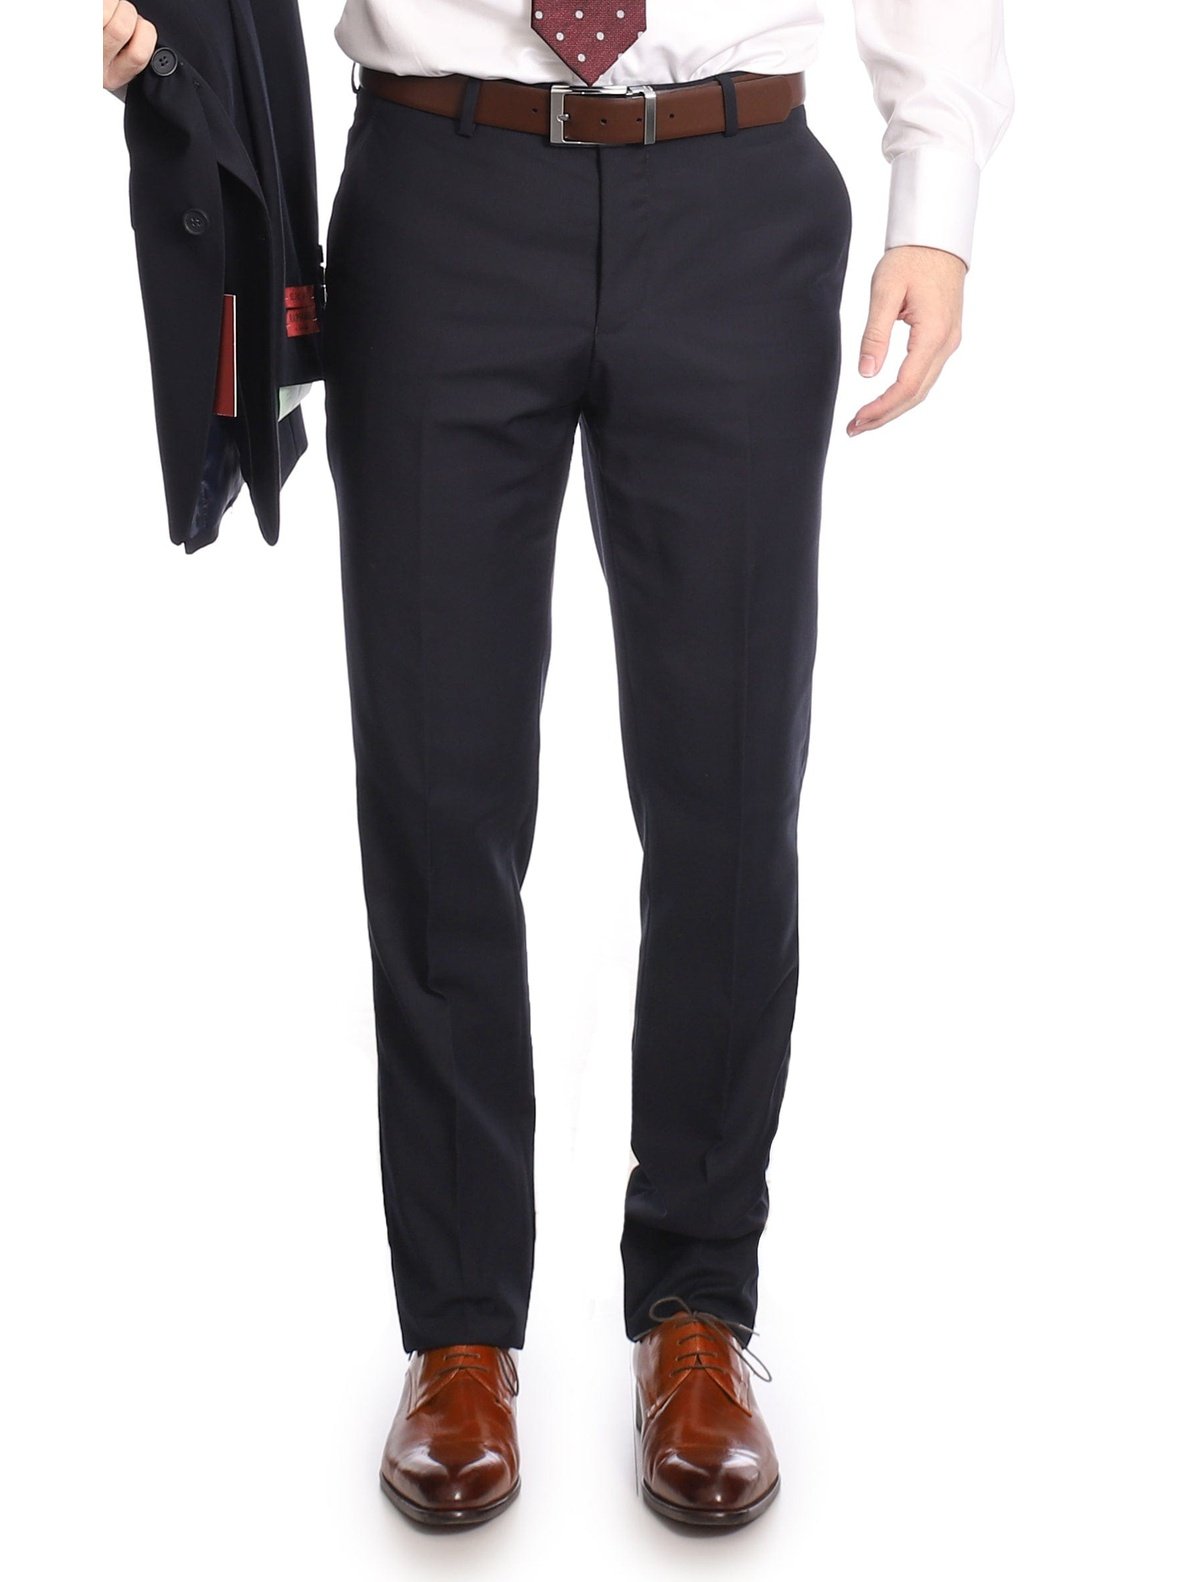 Regular Fit Two-Tone Tailored Pant - New Navy, Suit Pants